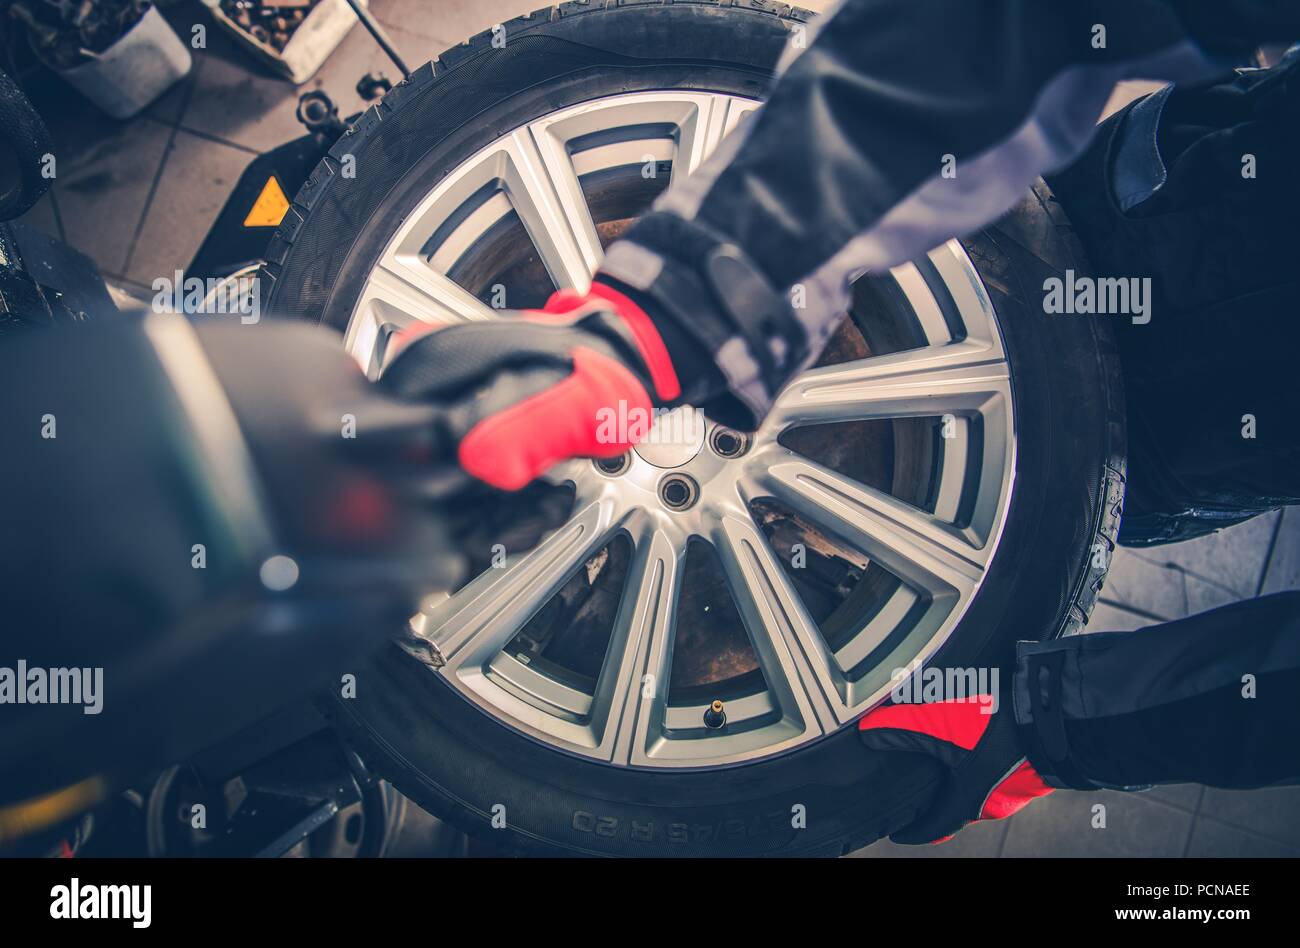 Car Tire Vulcanizing Service. Removing Tire From the Magnesium Alloy Wheel. Top View. Car Service Theme. Stock Photo